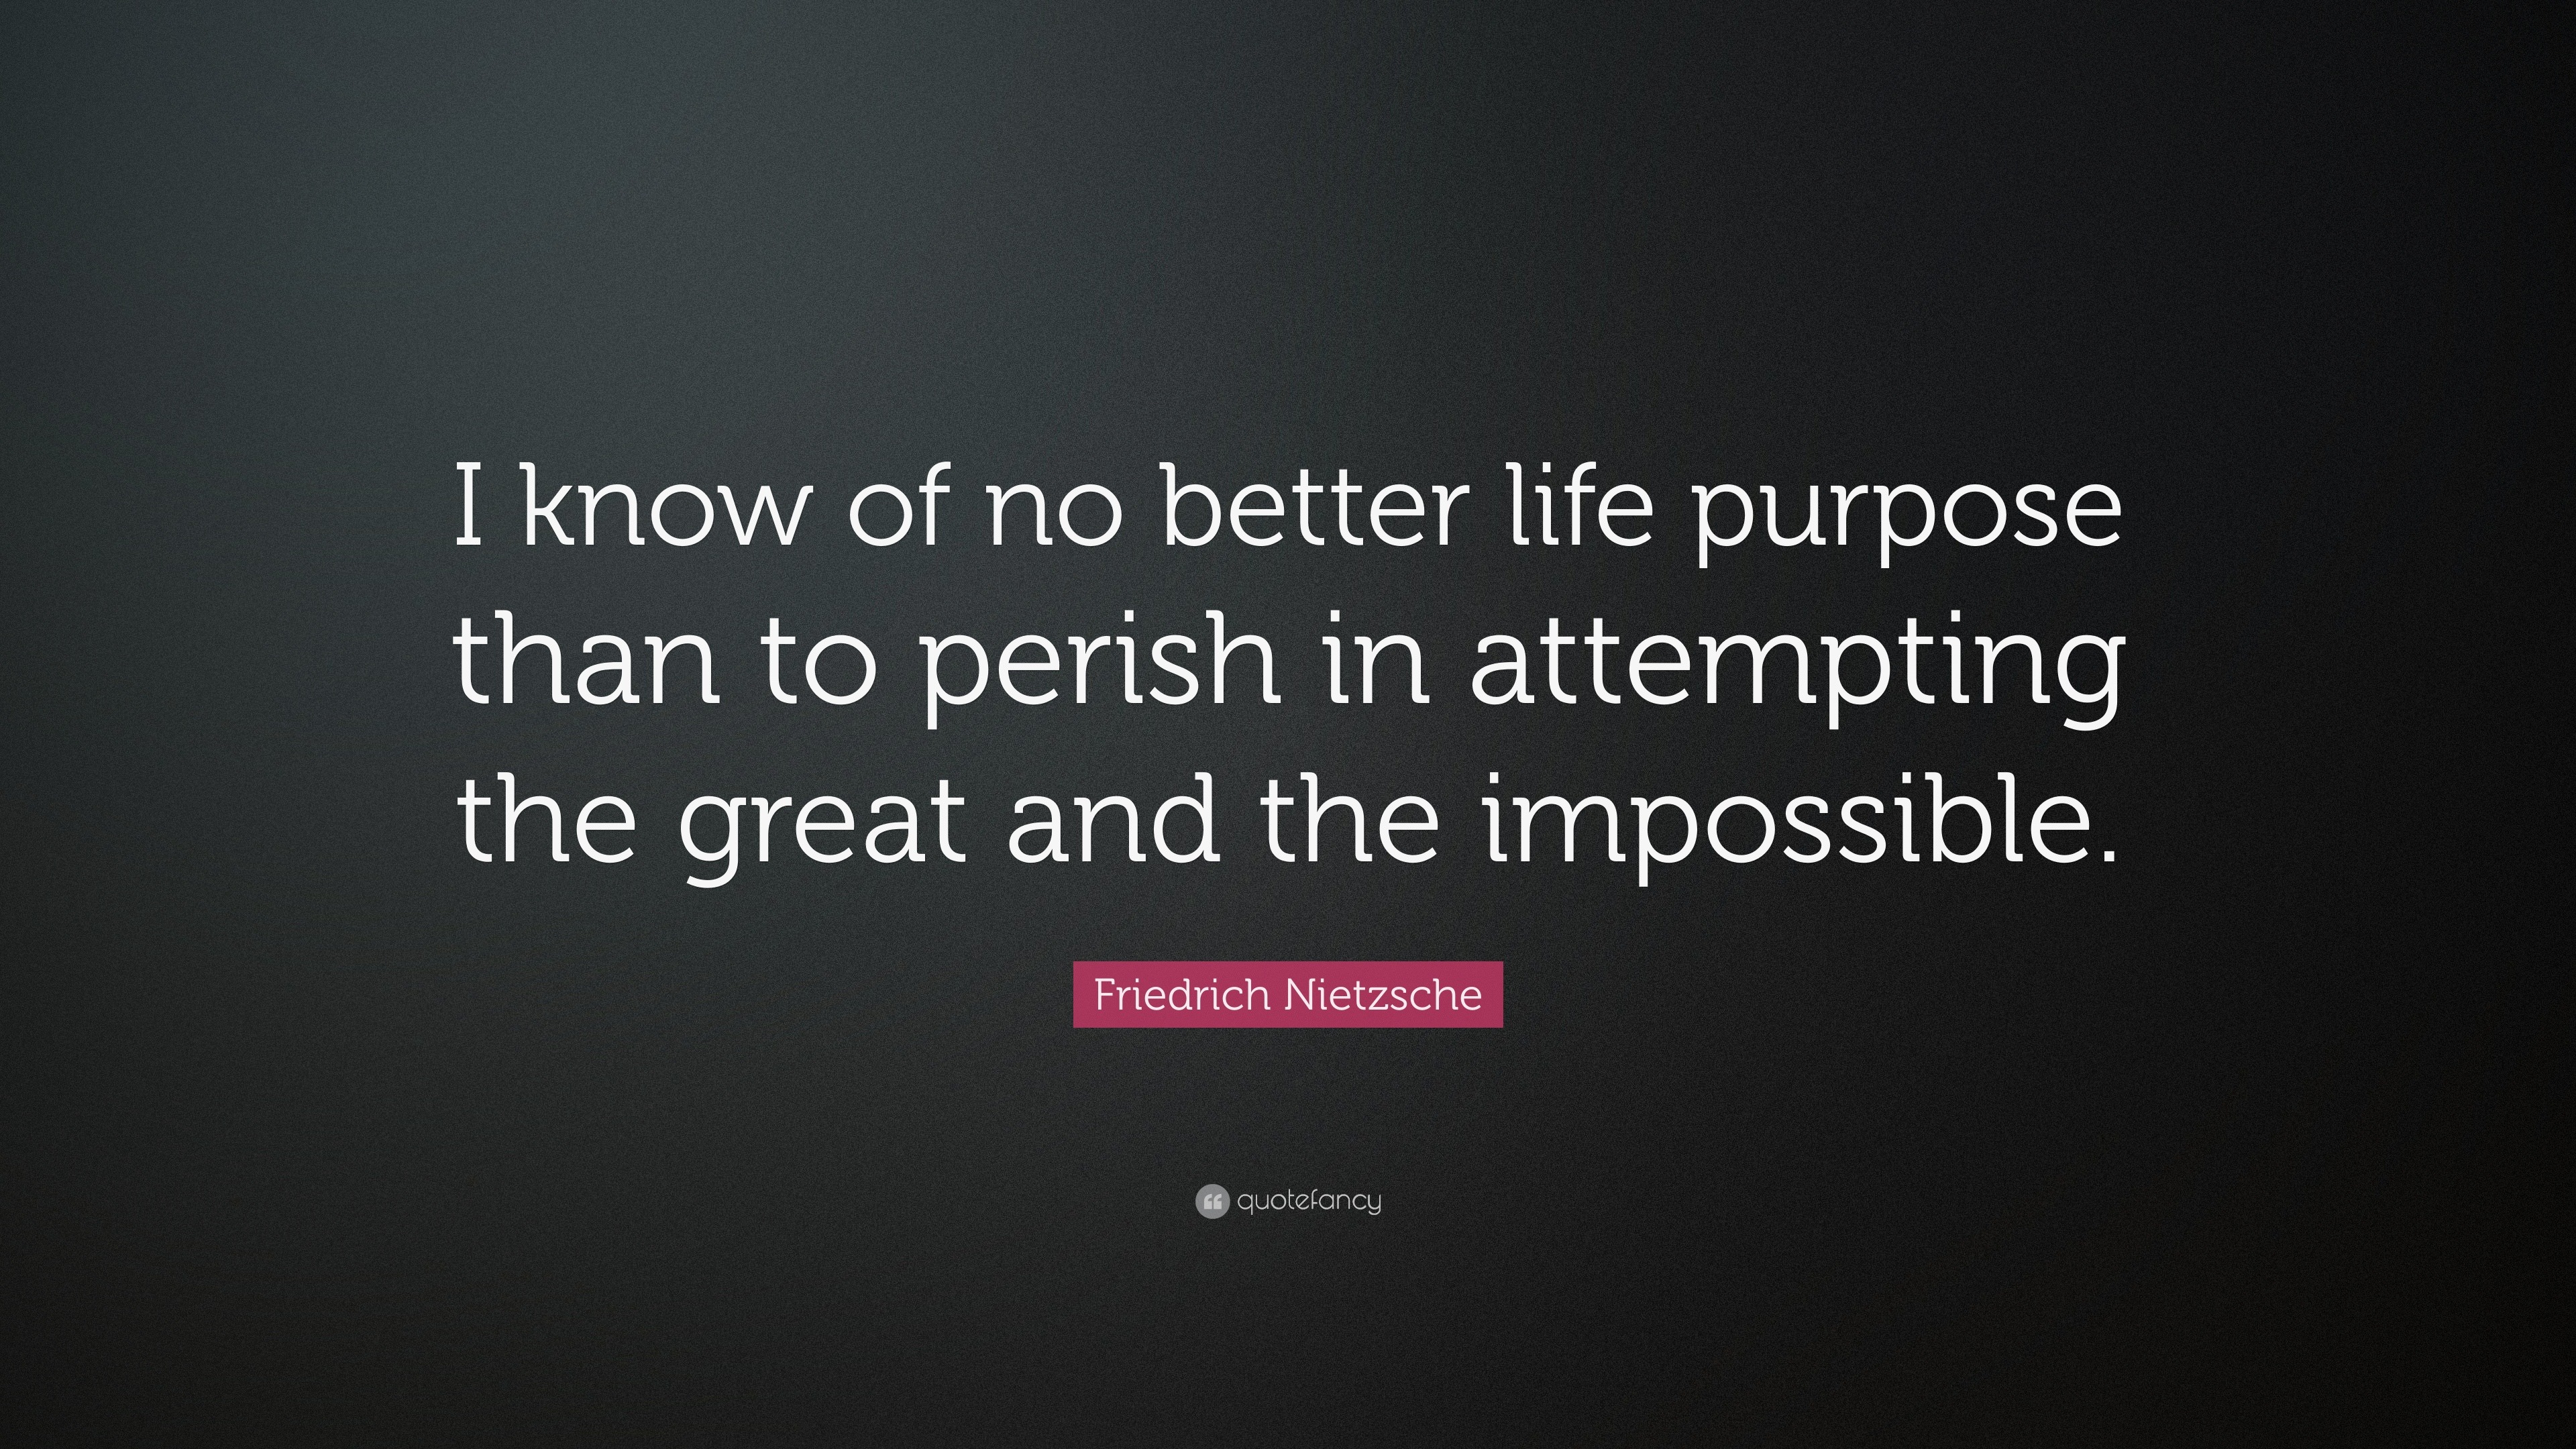 Friedrich Nietzsche Quote “I know of no better life purpose than to perish in